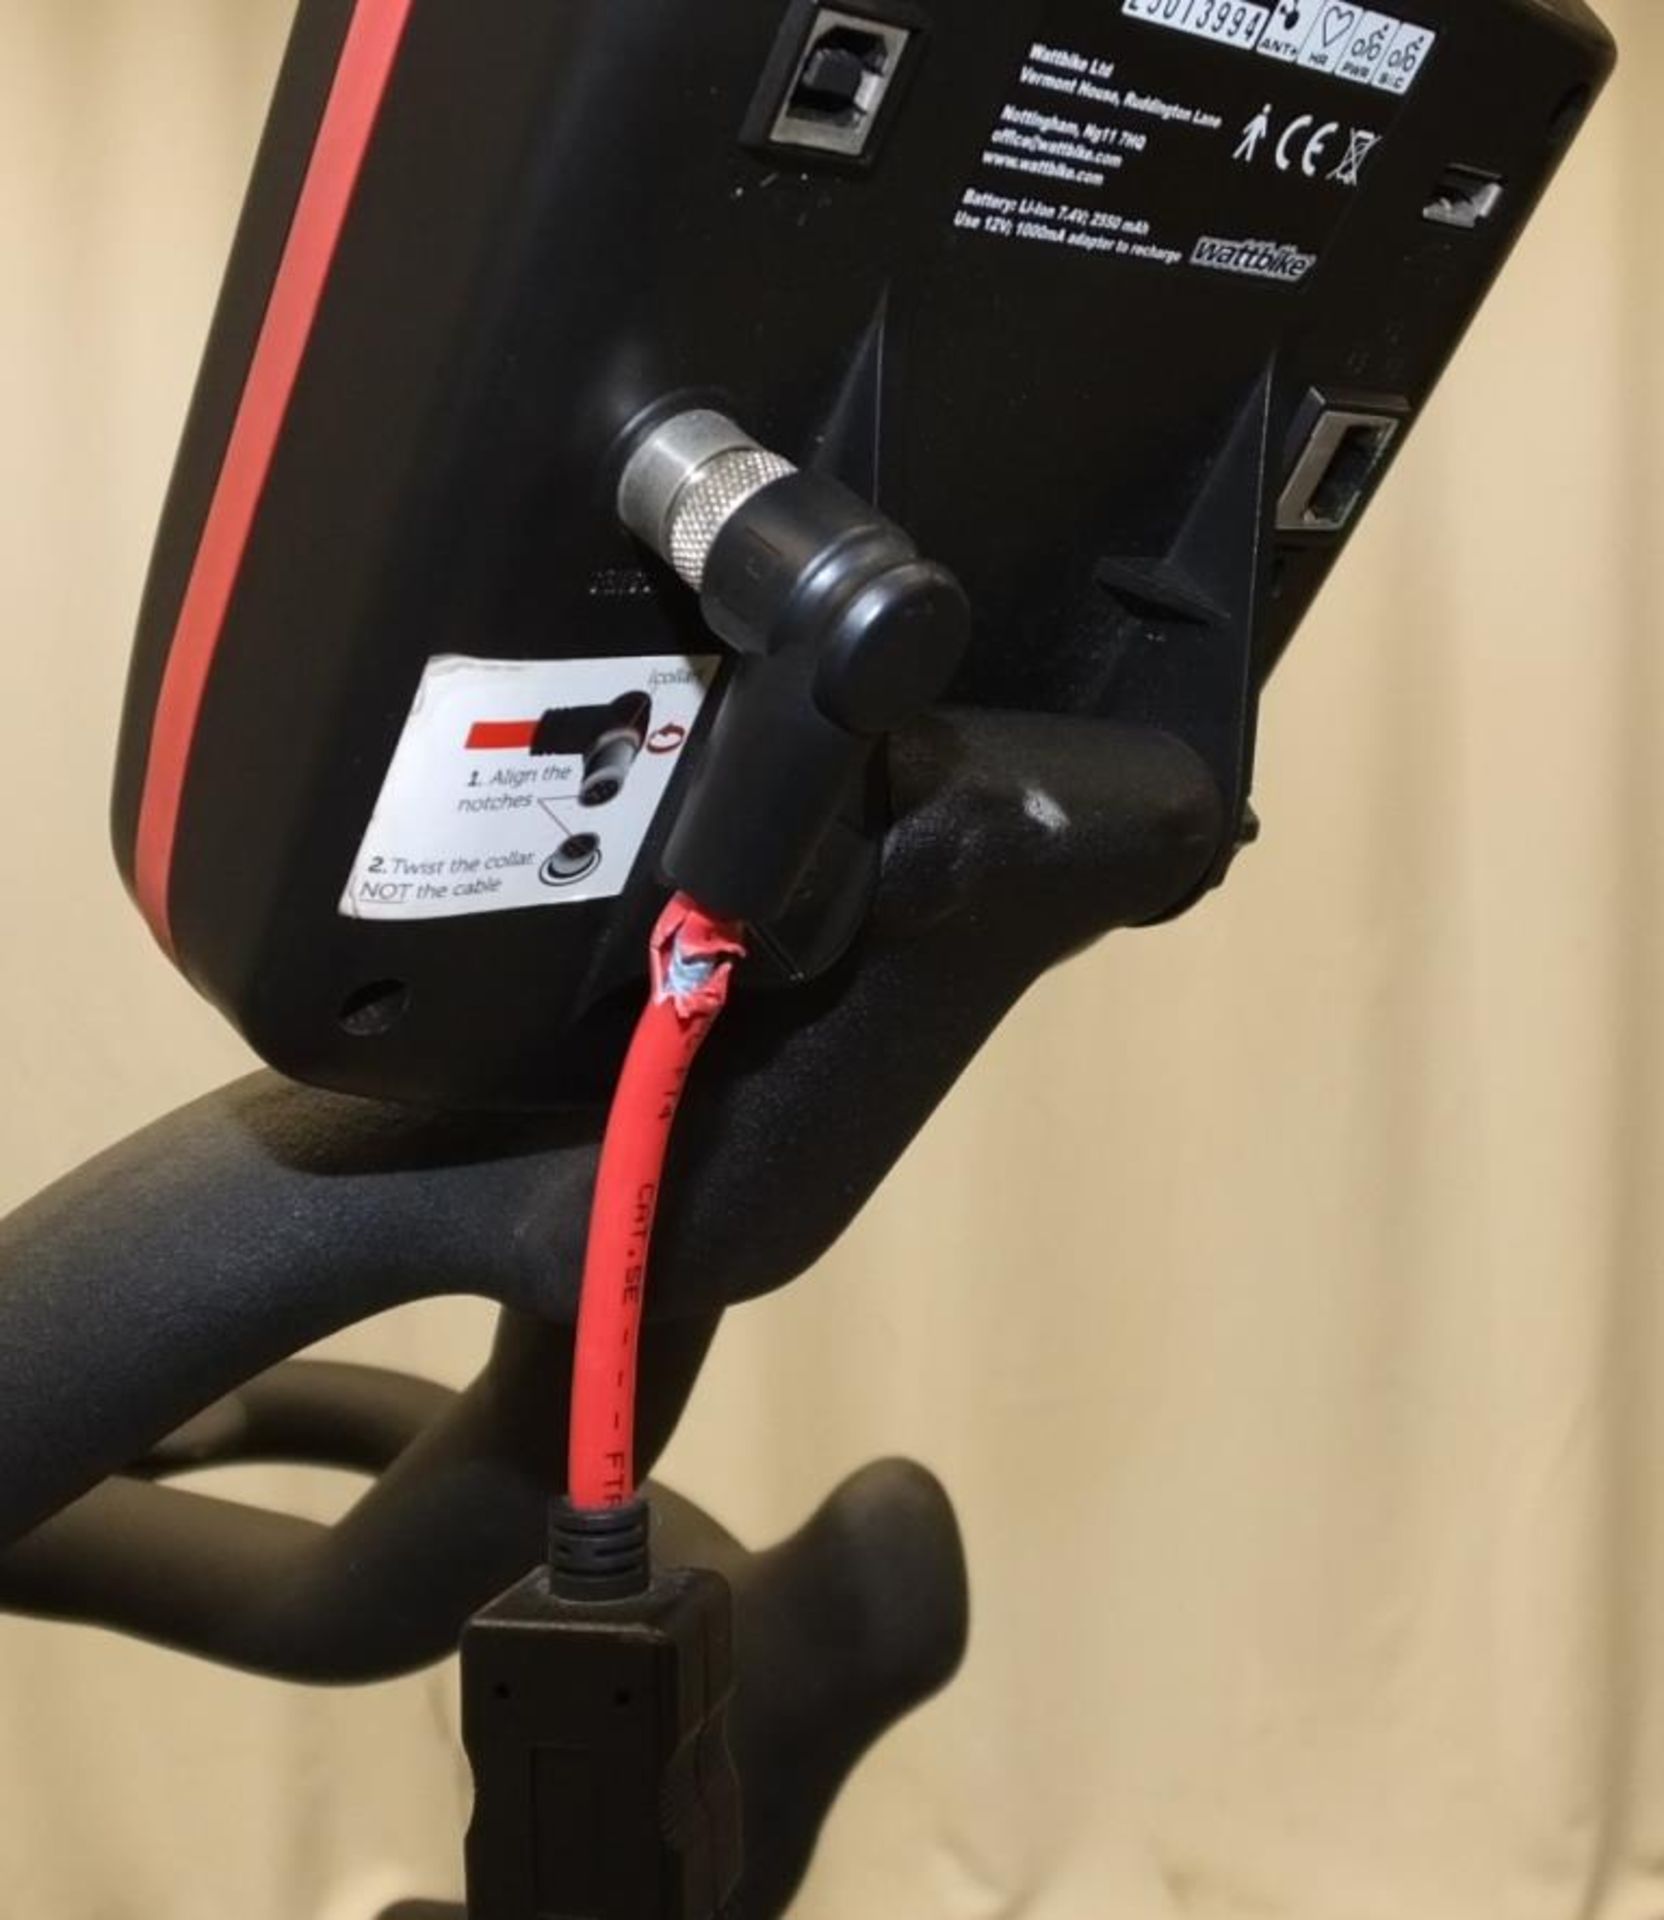 Wattbike Trainer Training Exercise Bike - console powers up - functionality untested - bent cable - Image 5 of 7